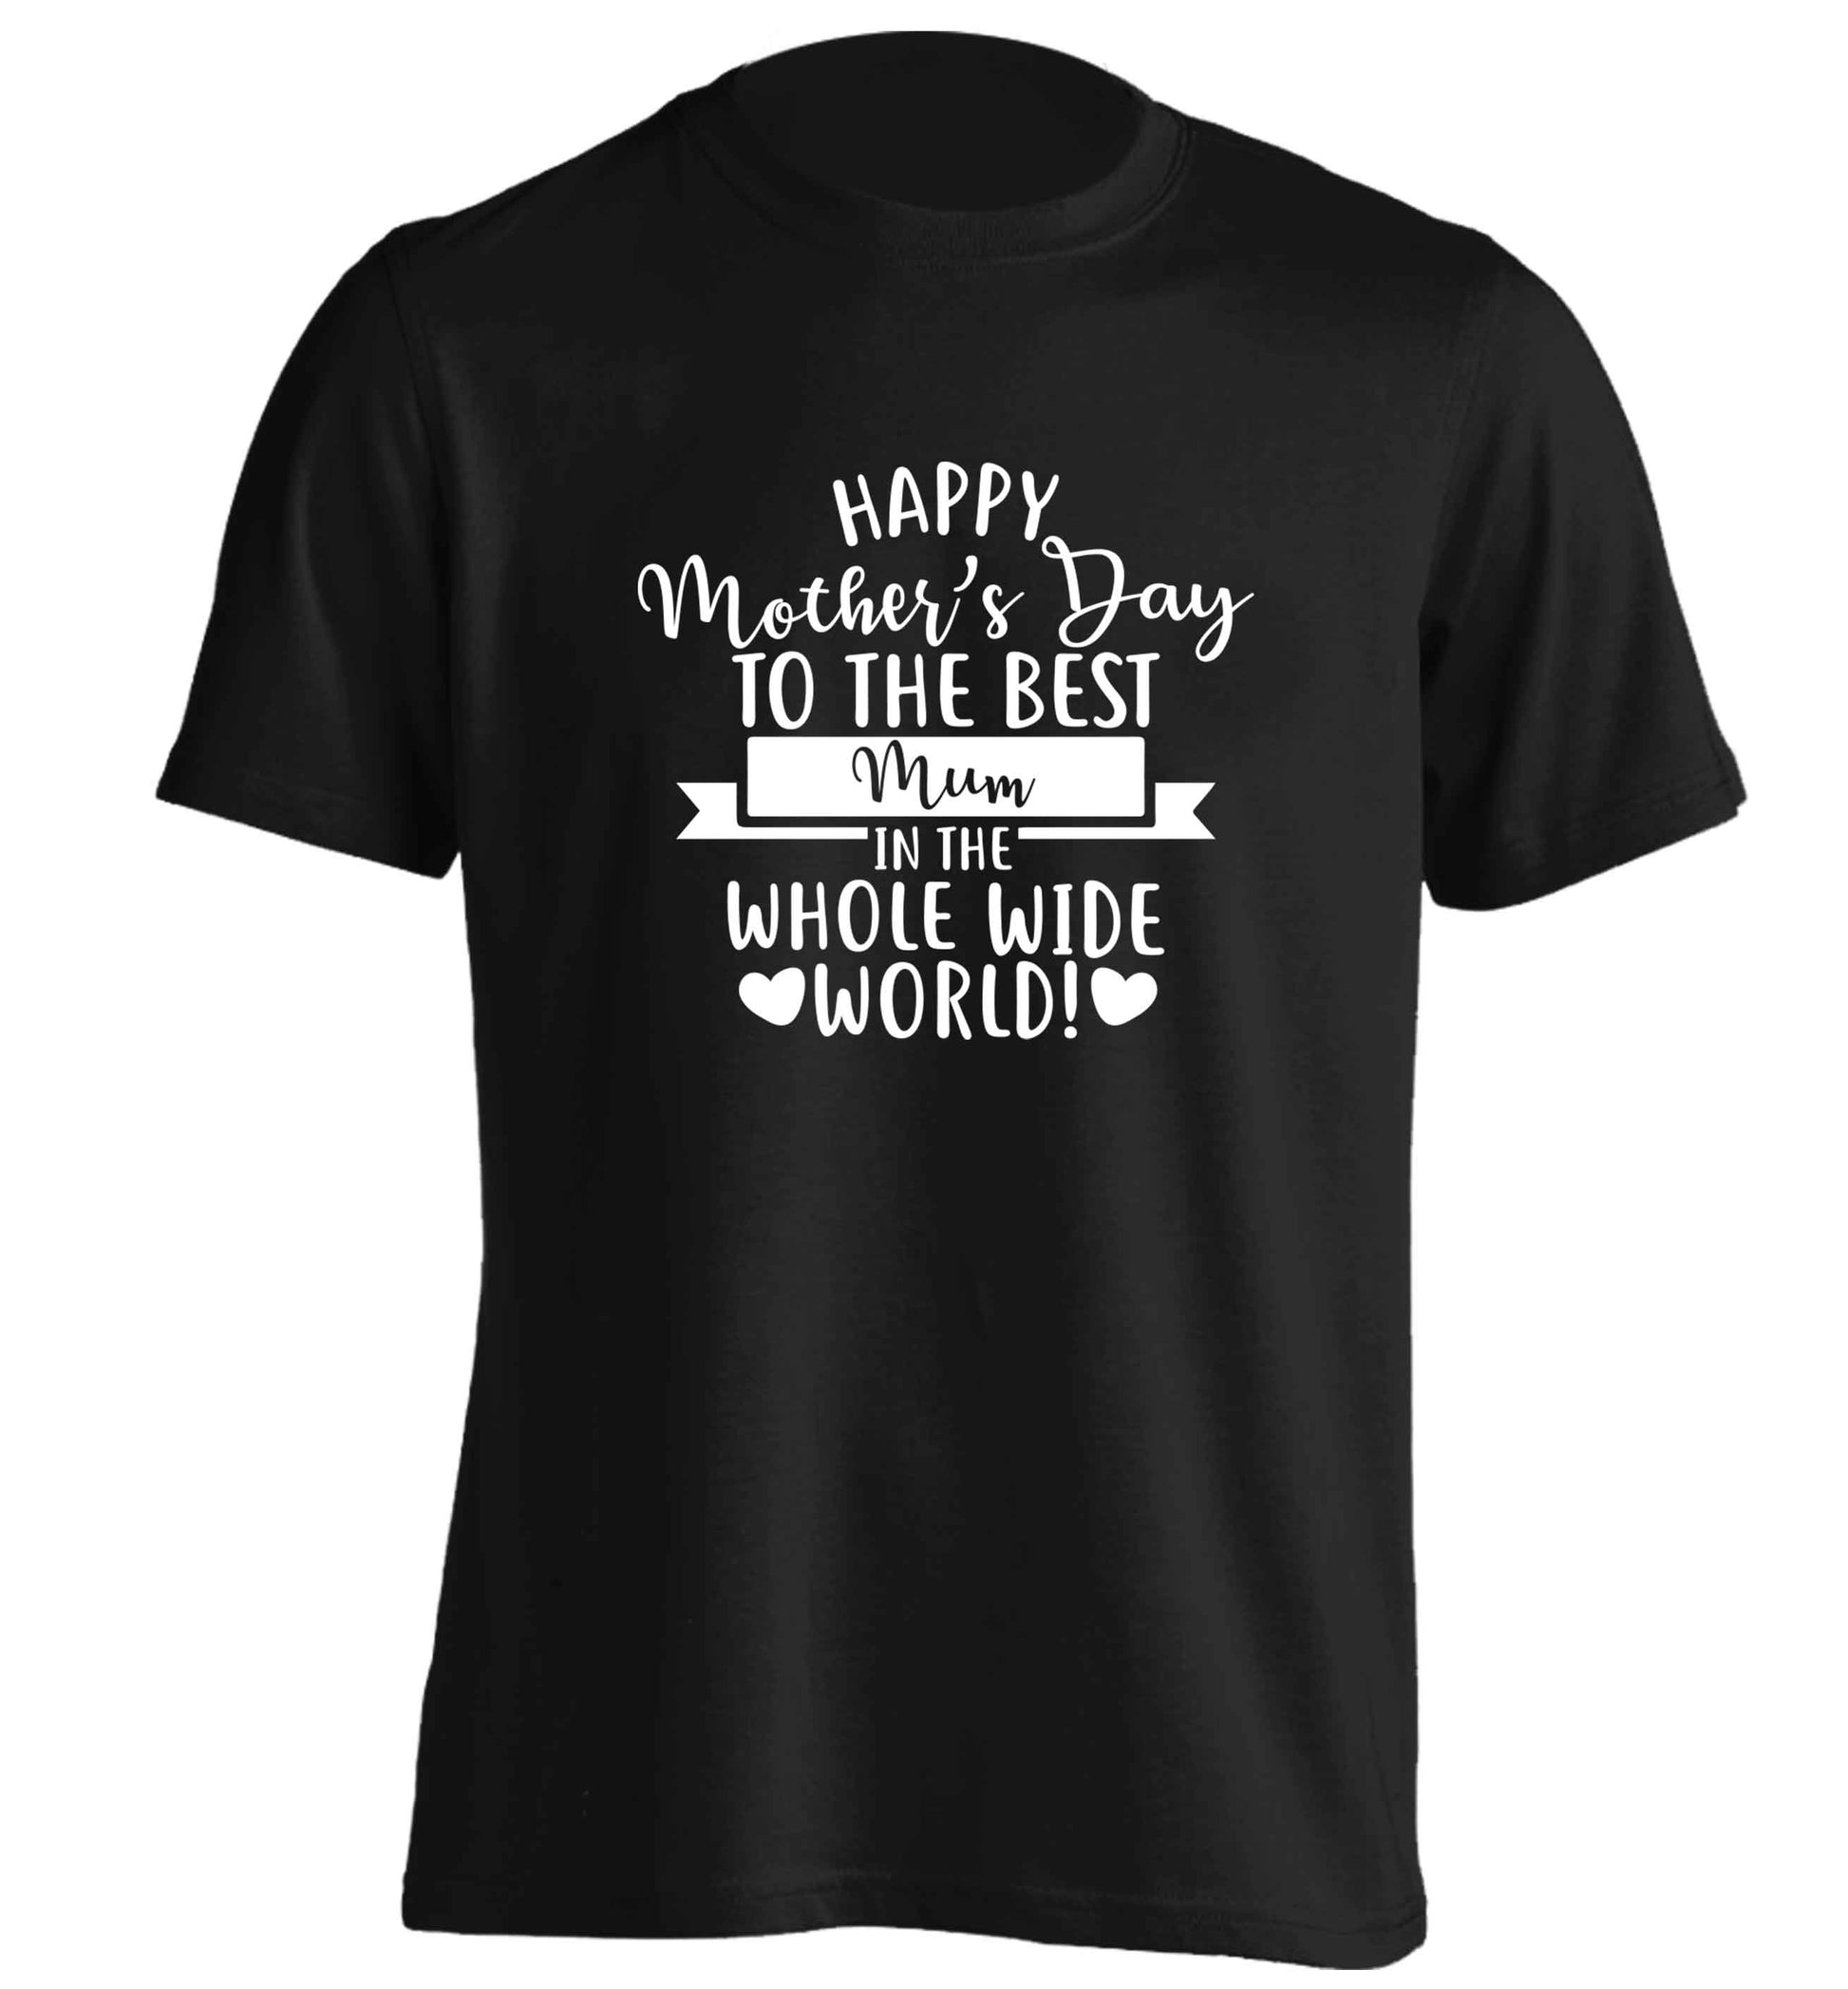 Happy mother's day to the best mum in the world adults unisex black Tshirt 2XL